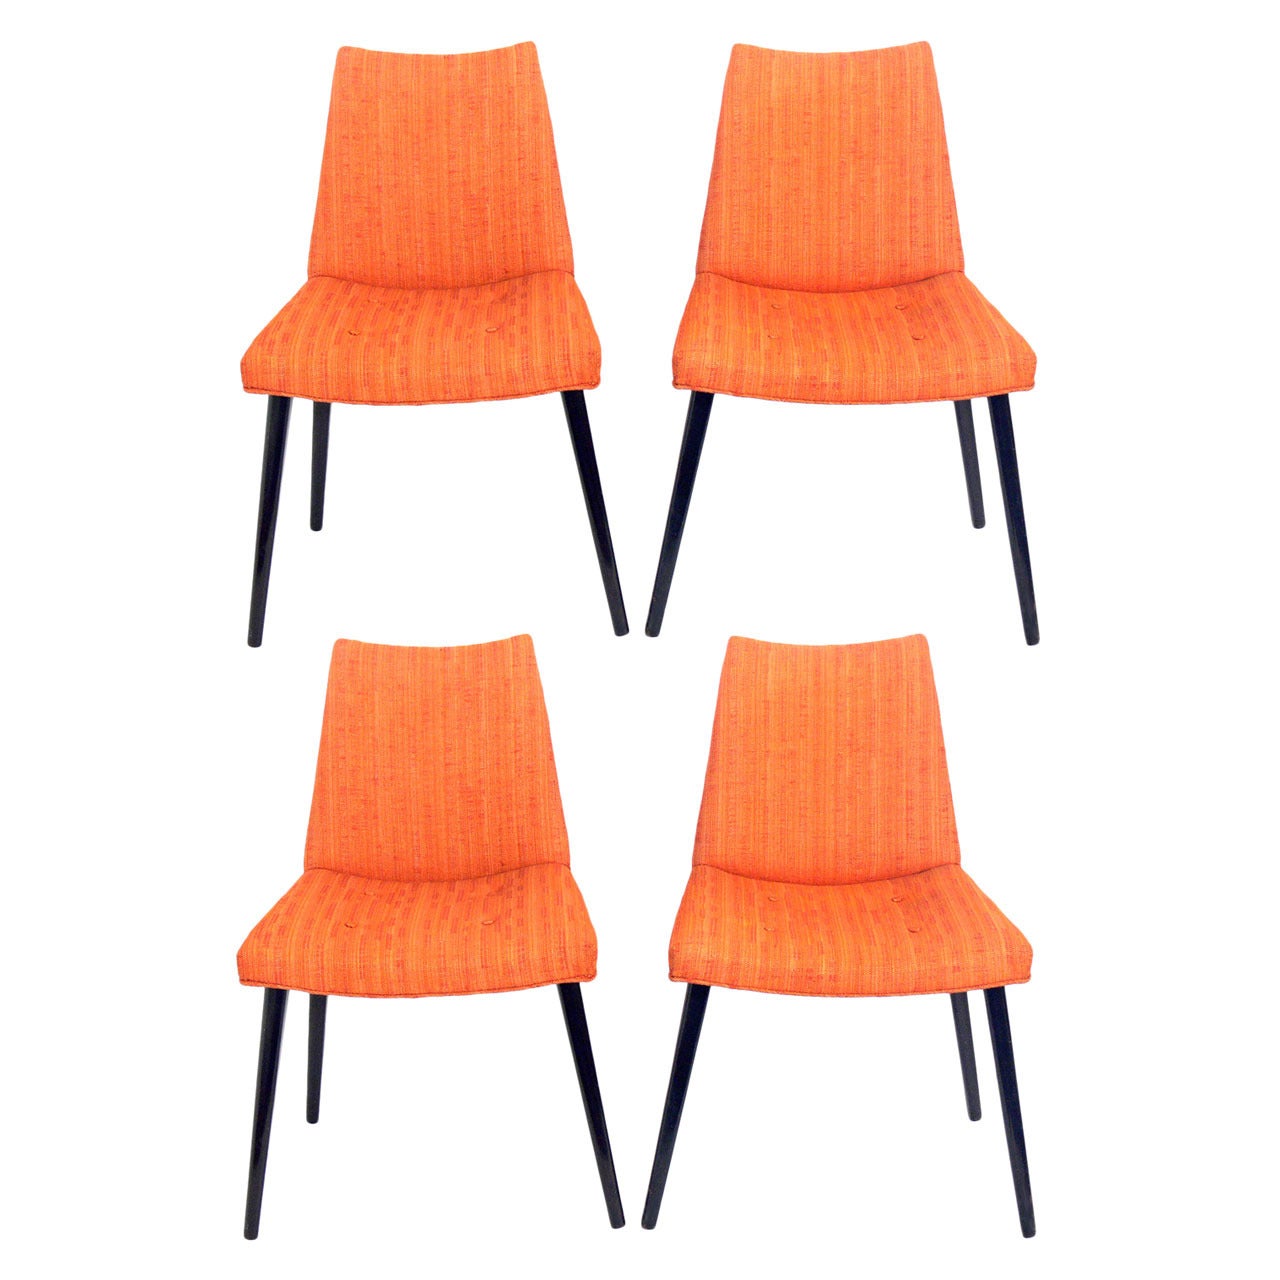 Set of Four Modern Dining Chairs in the manner of Edward Wormley for Dunbar